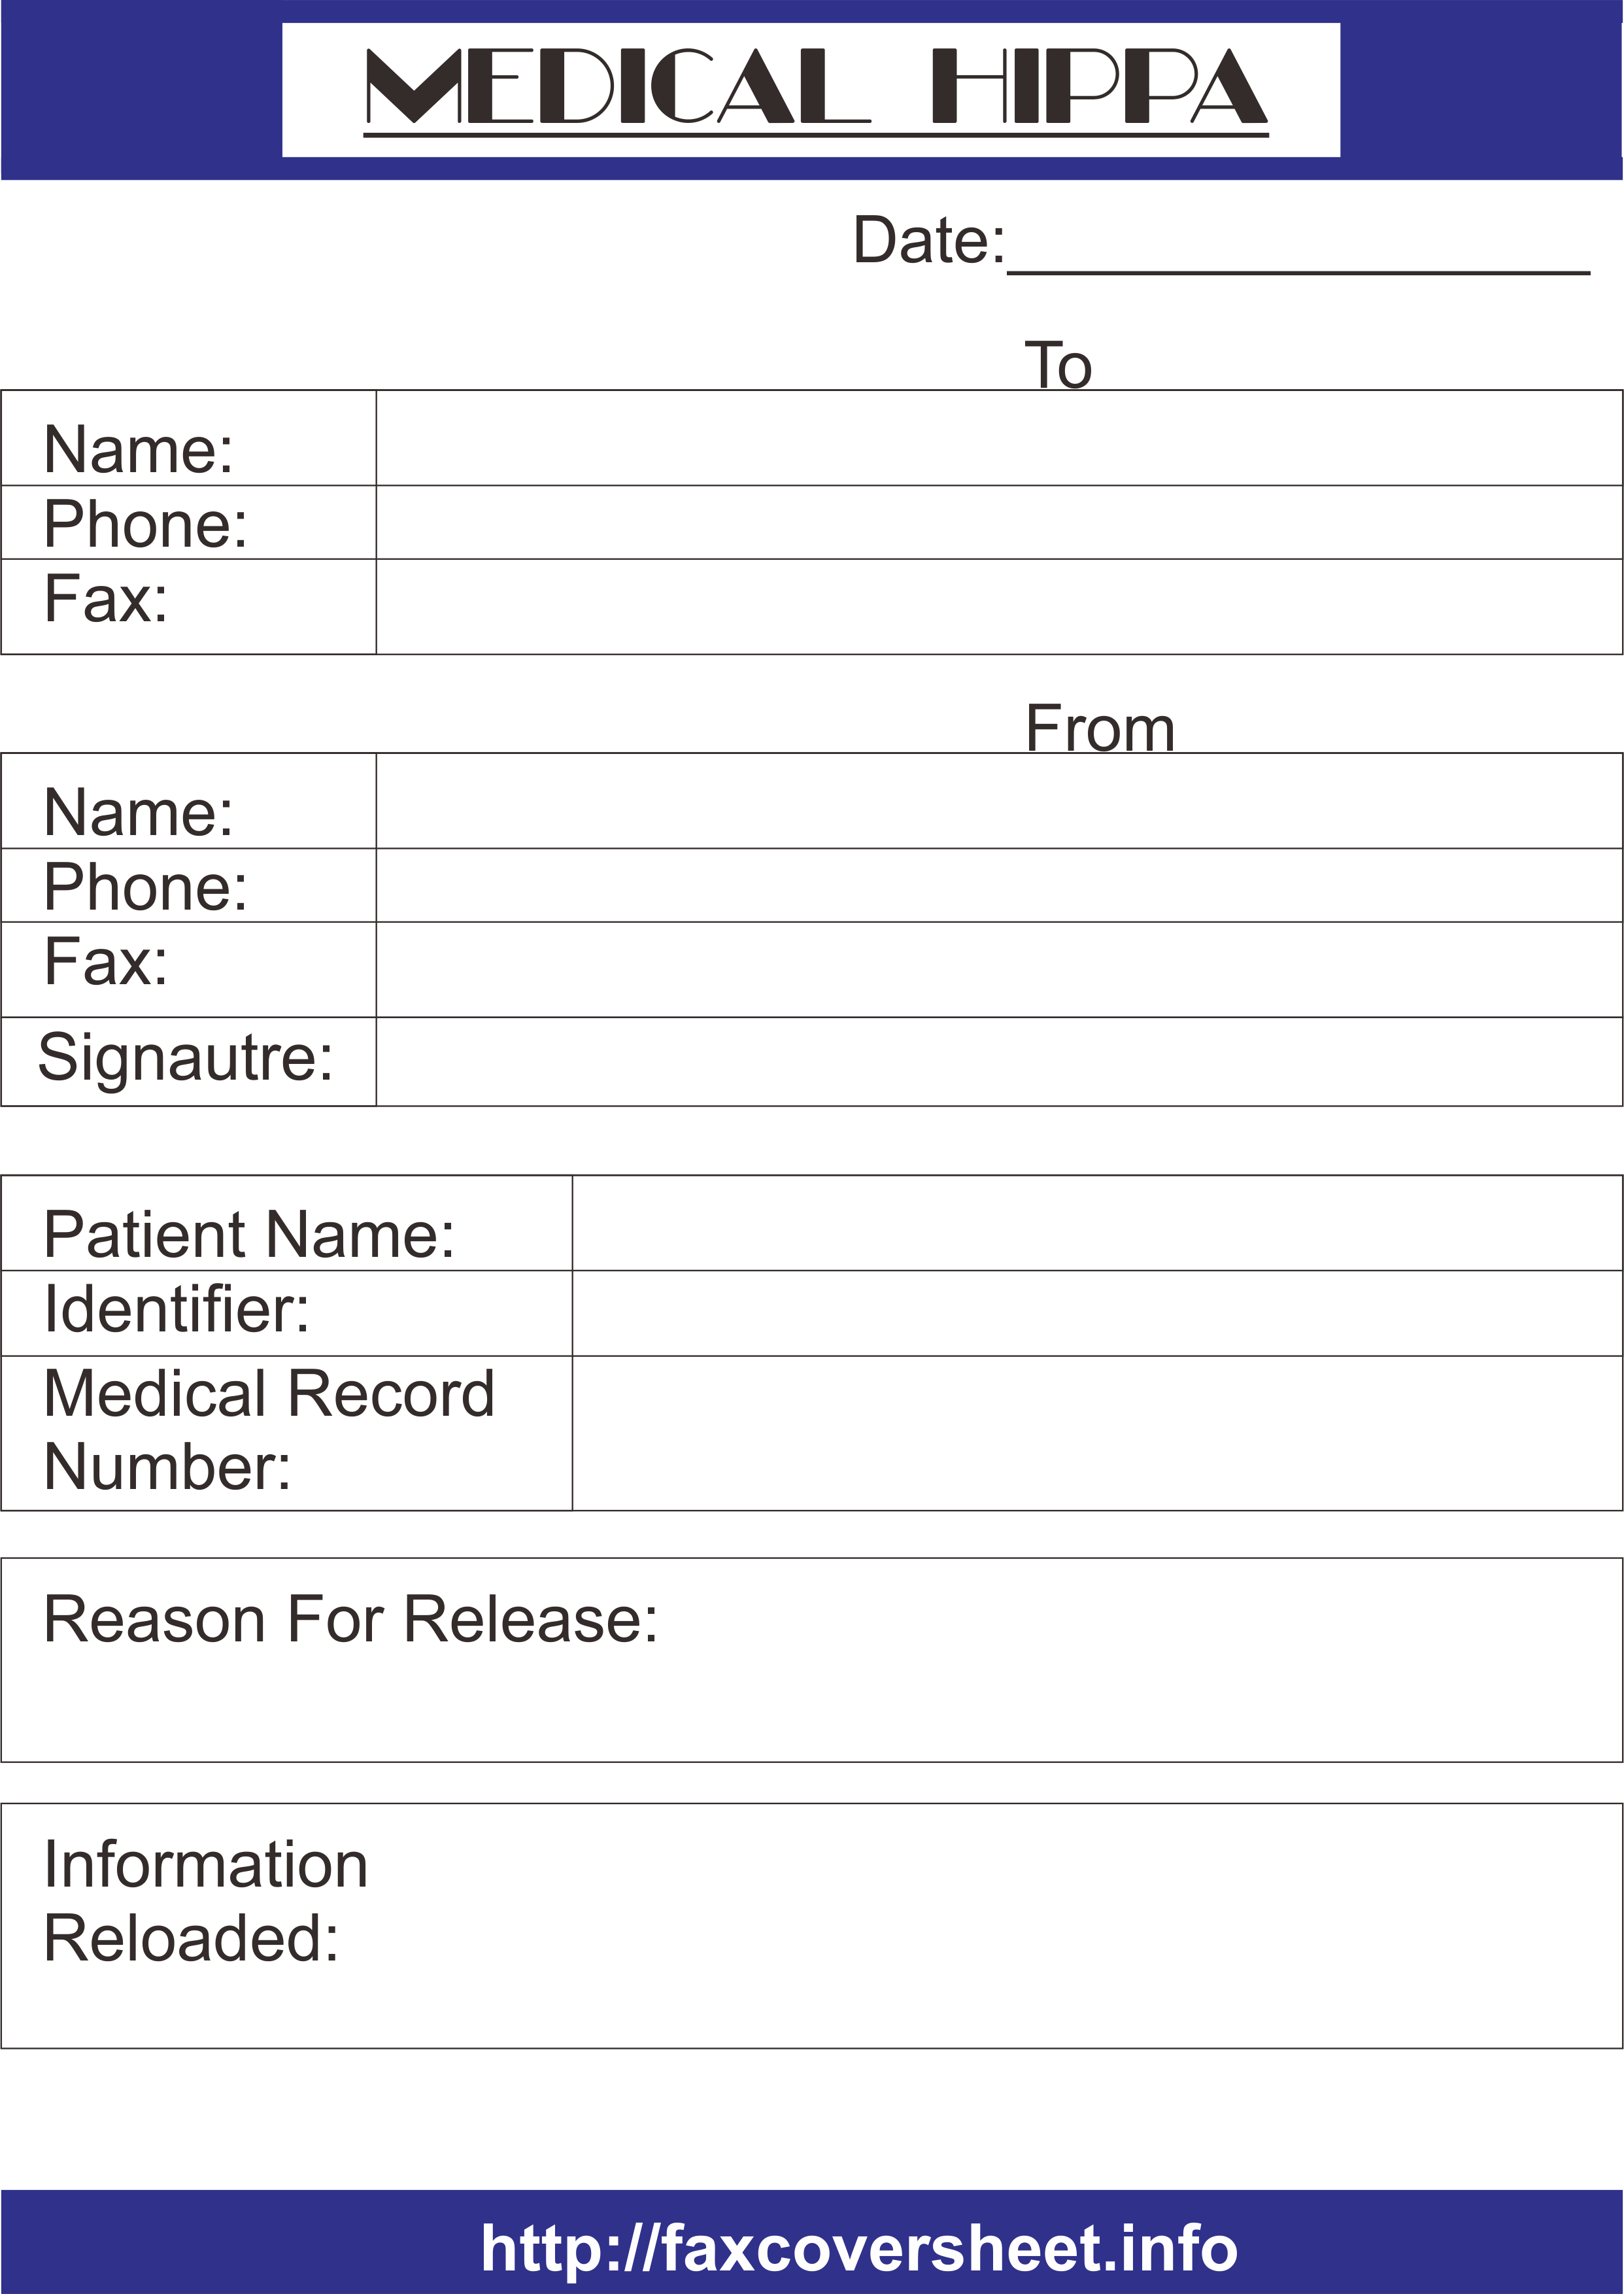 medical hippa 1 – [Free]^^ Fax Cover Sheet Template